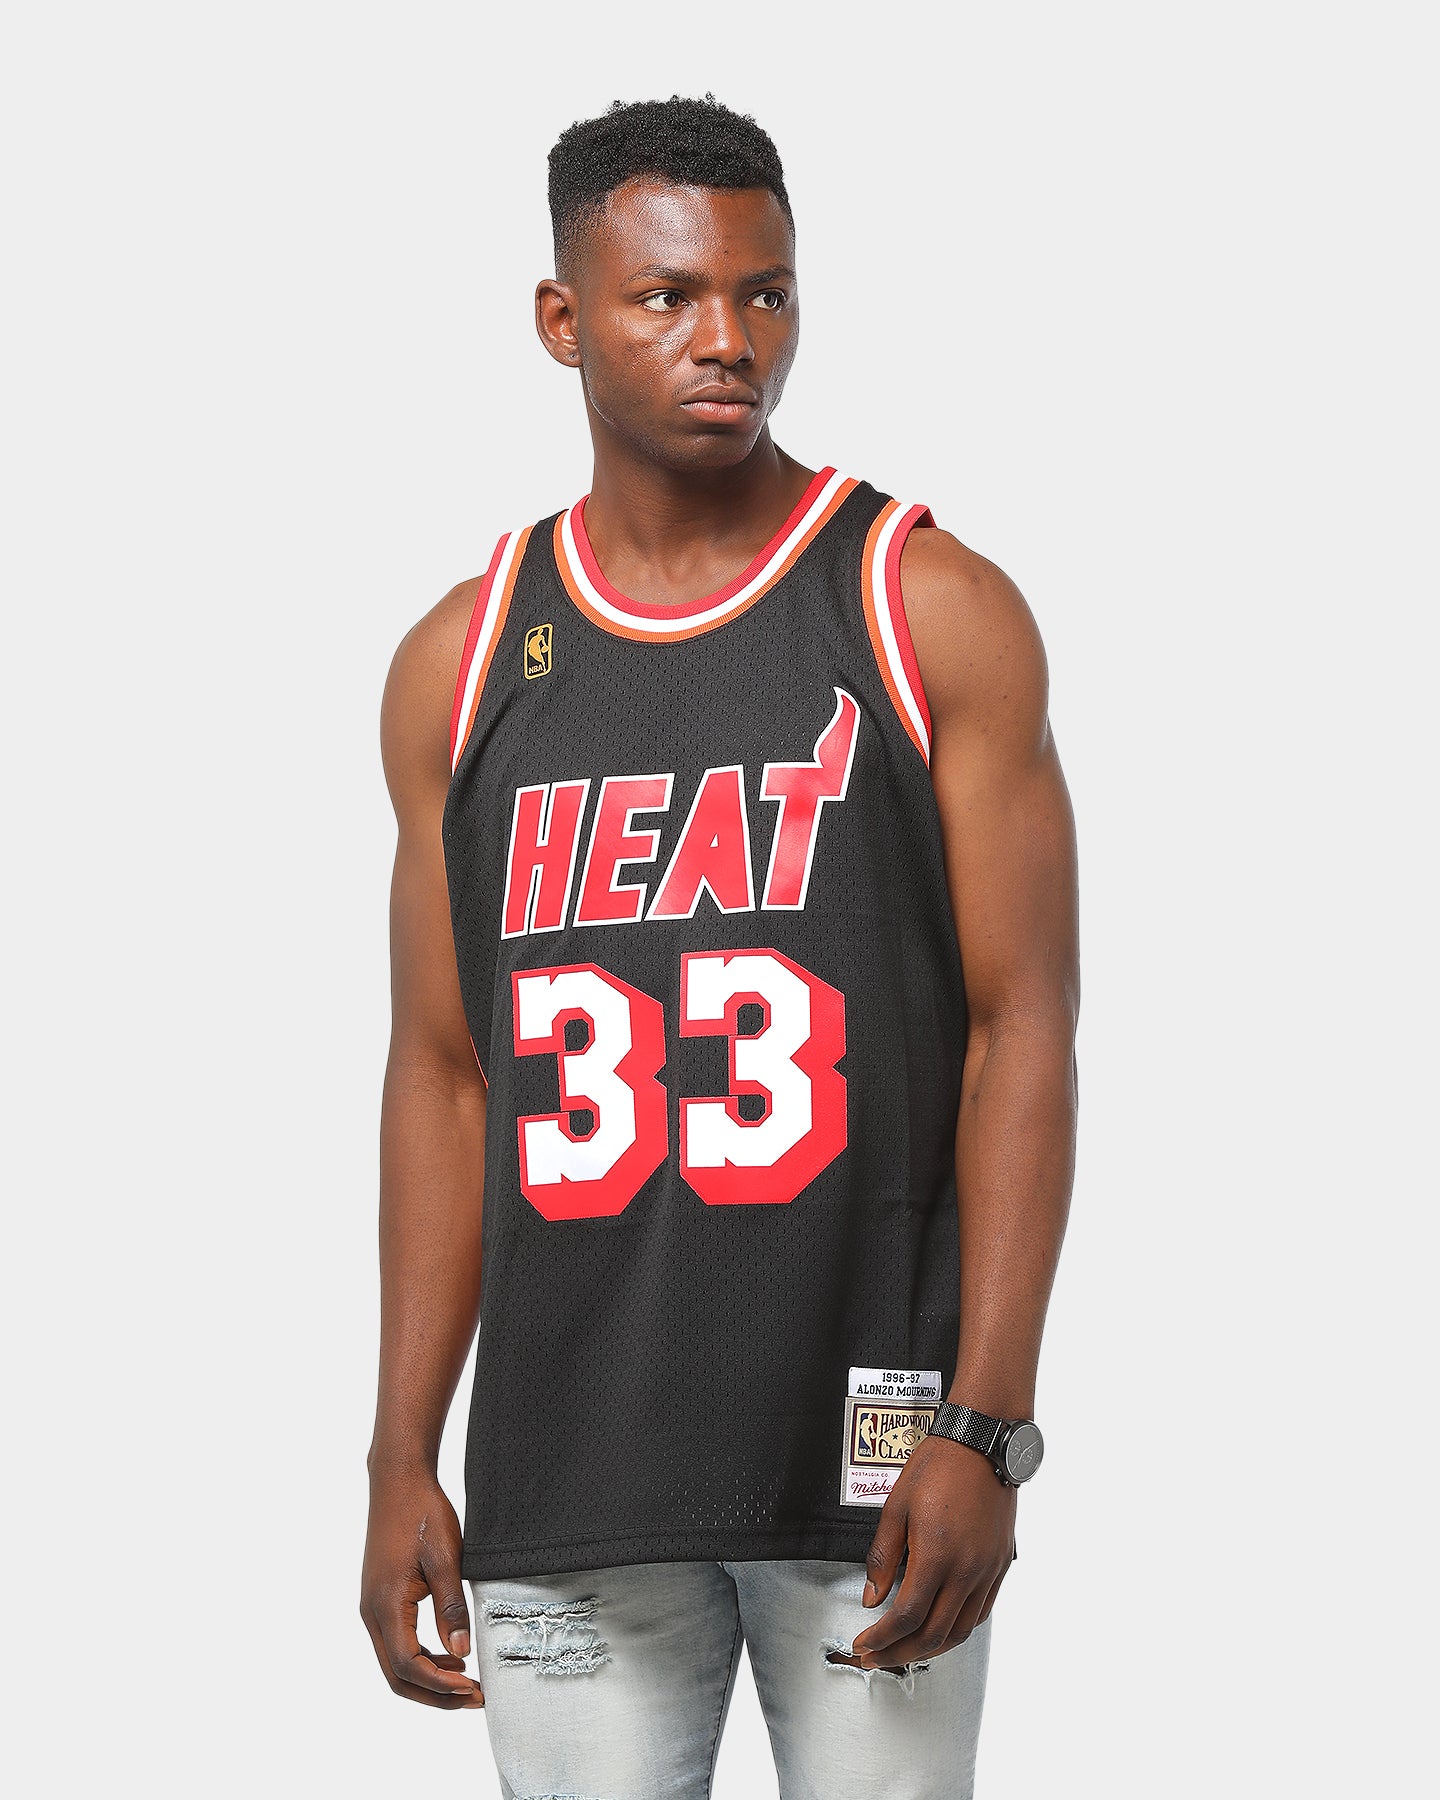 mourning heat jersey